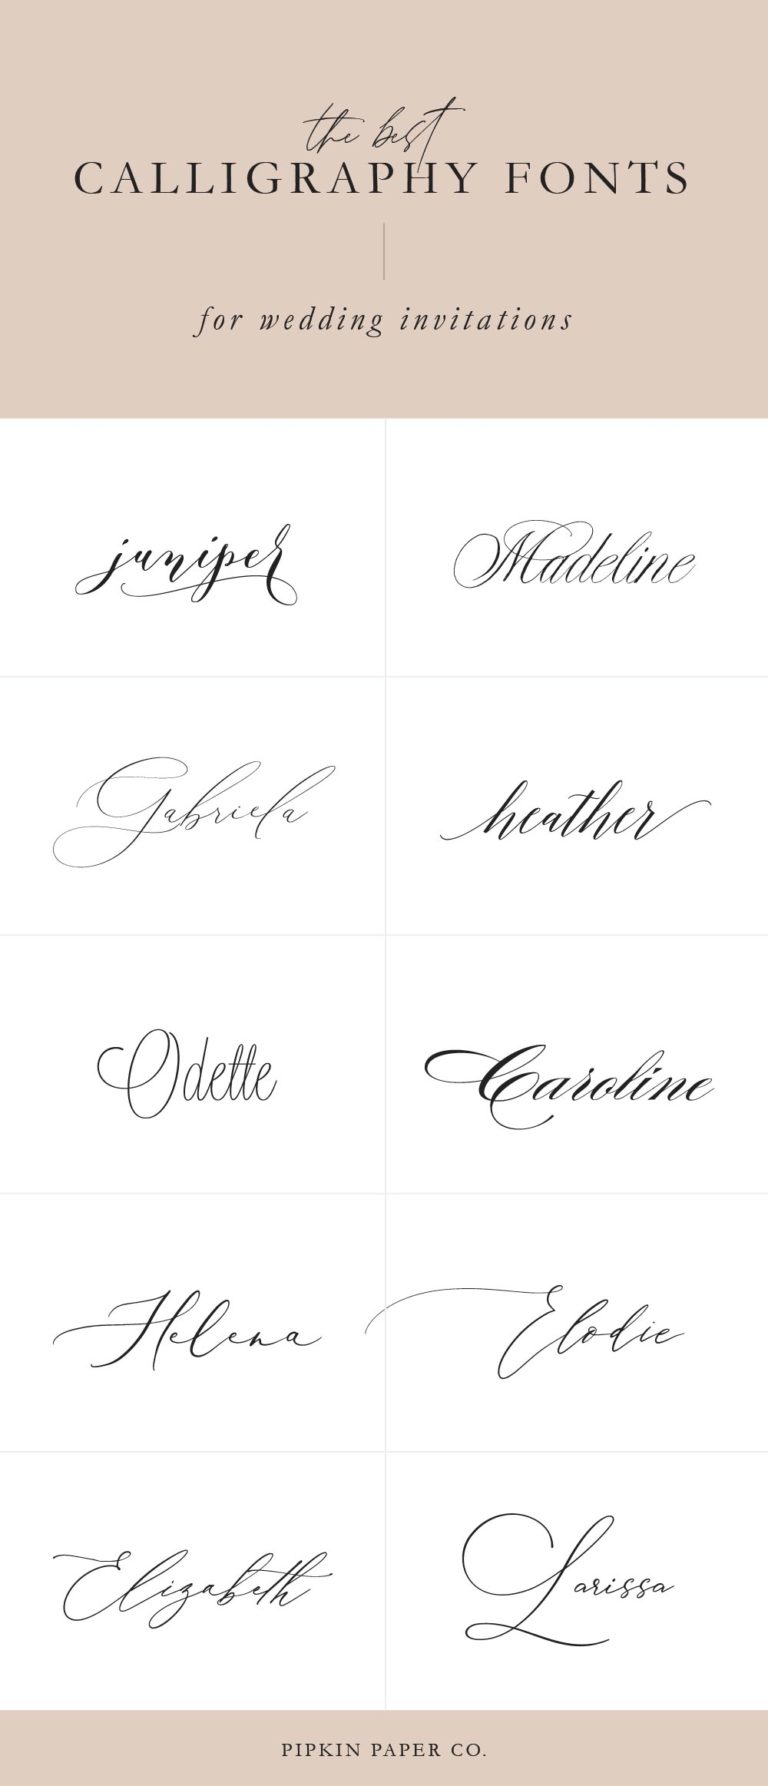 The Best Calligraphy Fonts for Wedding Invitations | Pipkin Paper Company